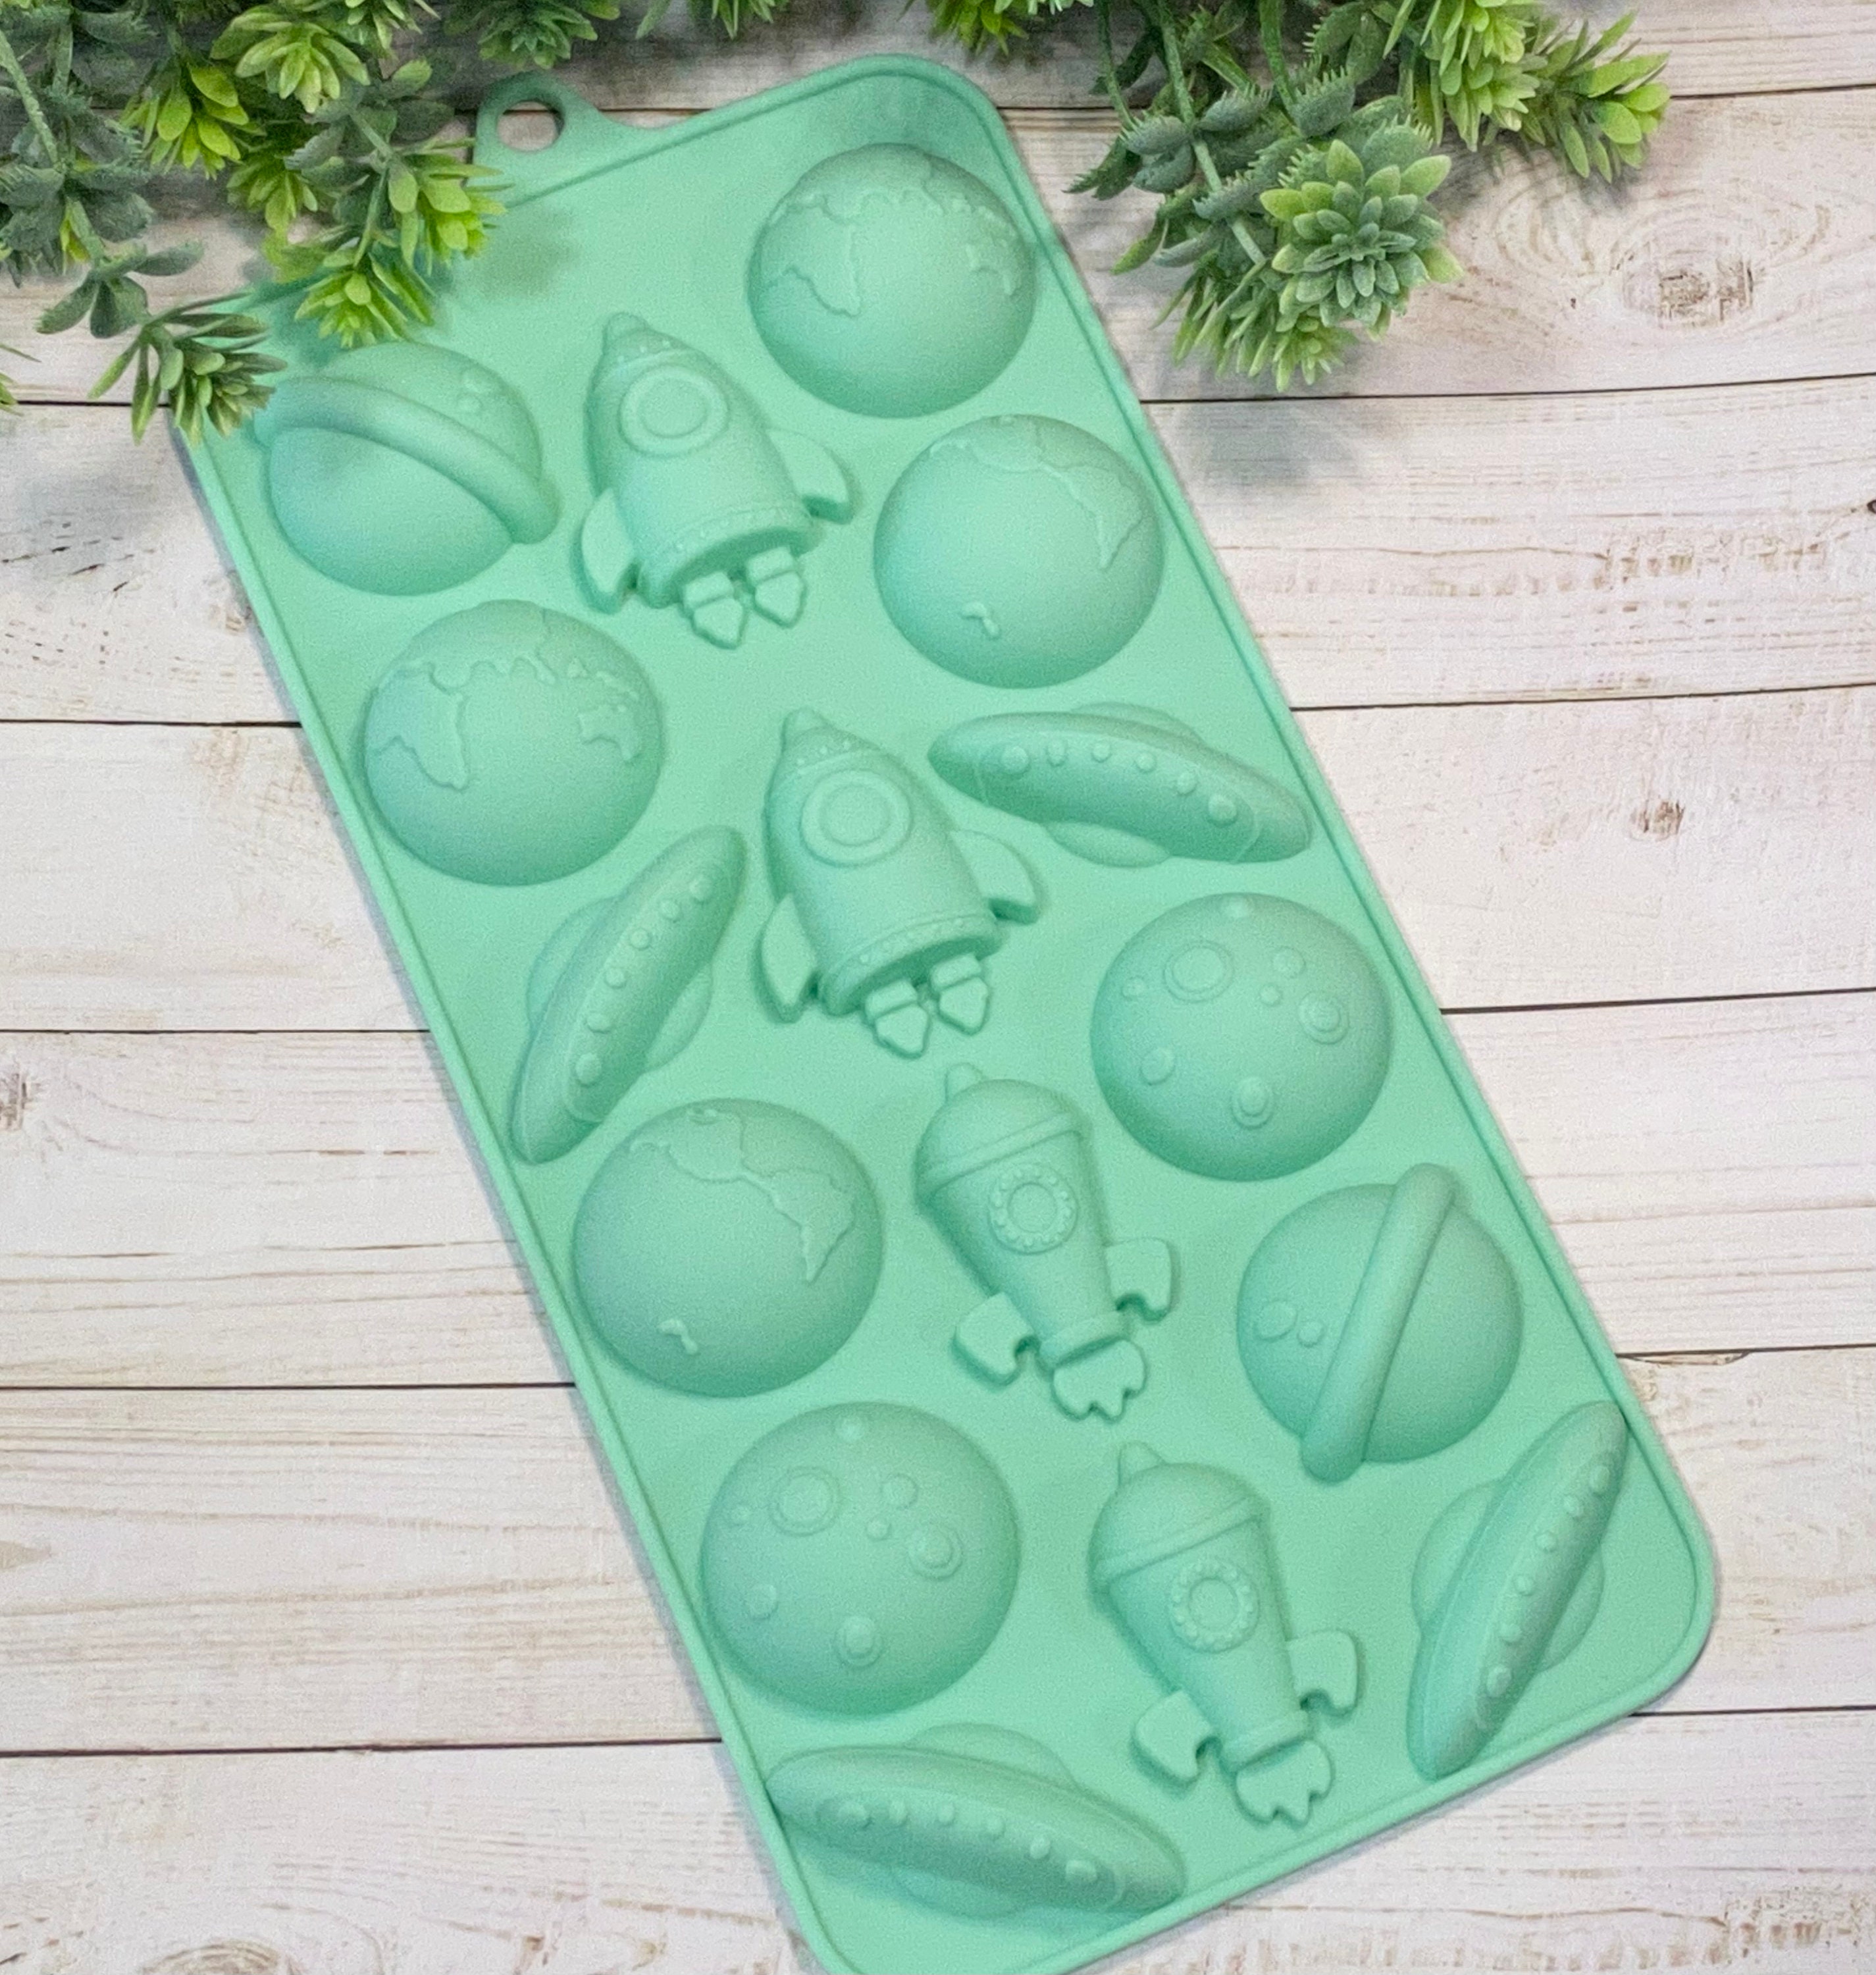 Stir 4 x 9 Silicone Space Candy Mold - Molds - Baking & Kitchen